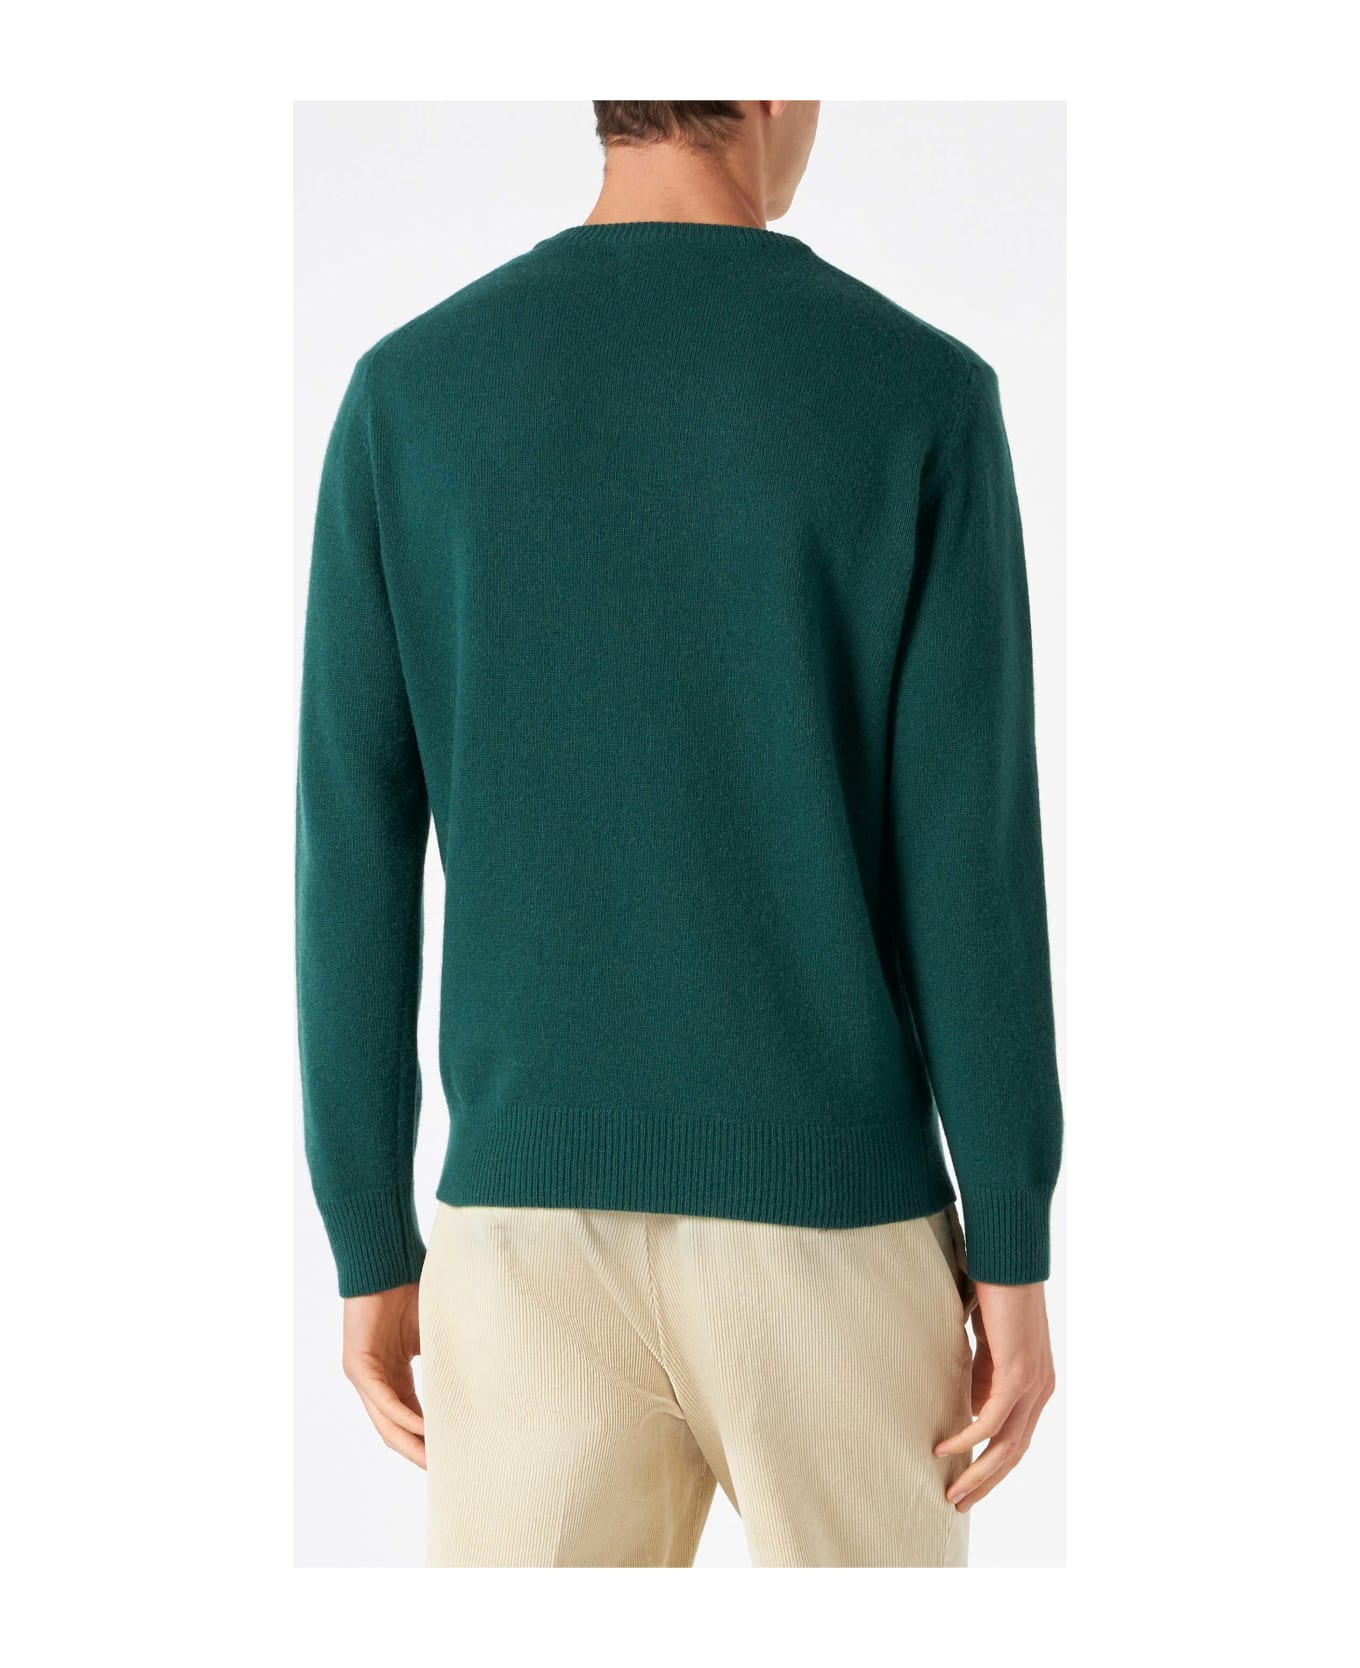 MC2 Saint Barth Man Green Sweater With Snoopy Print | Snoopy - Peanuts Special Edition ニットウェア